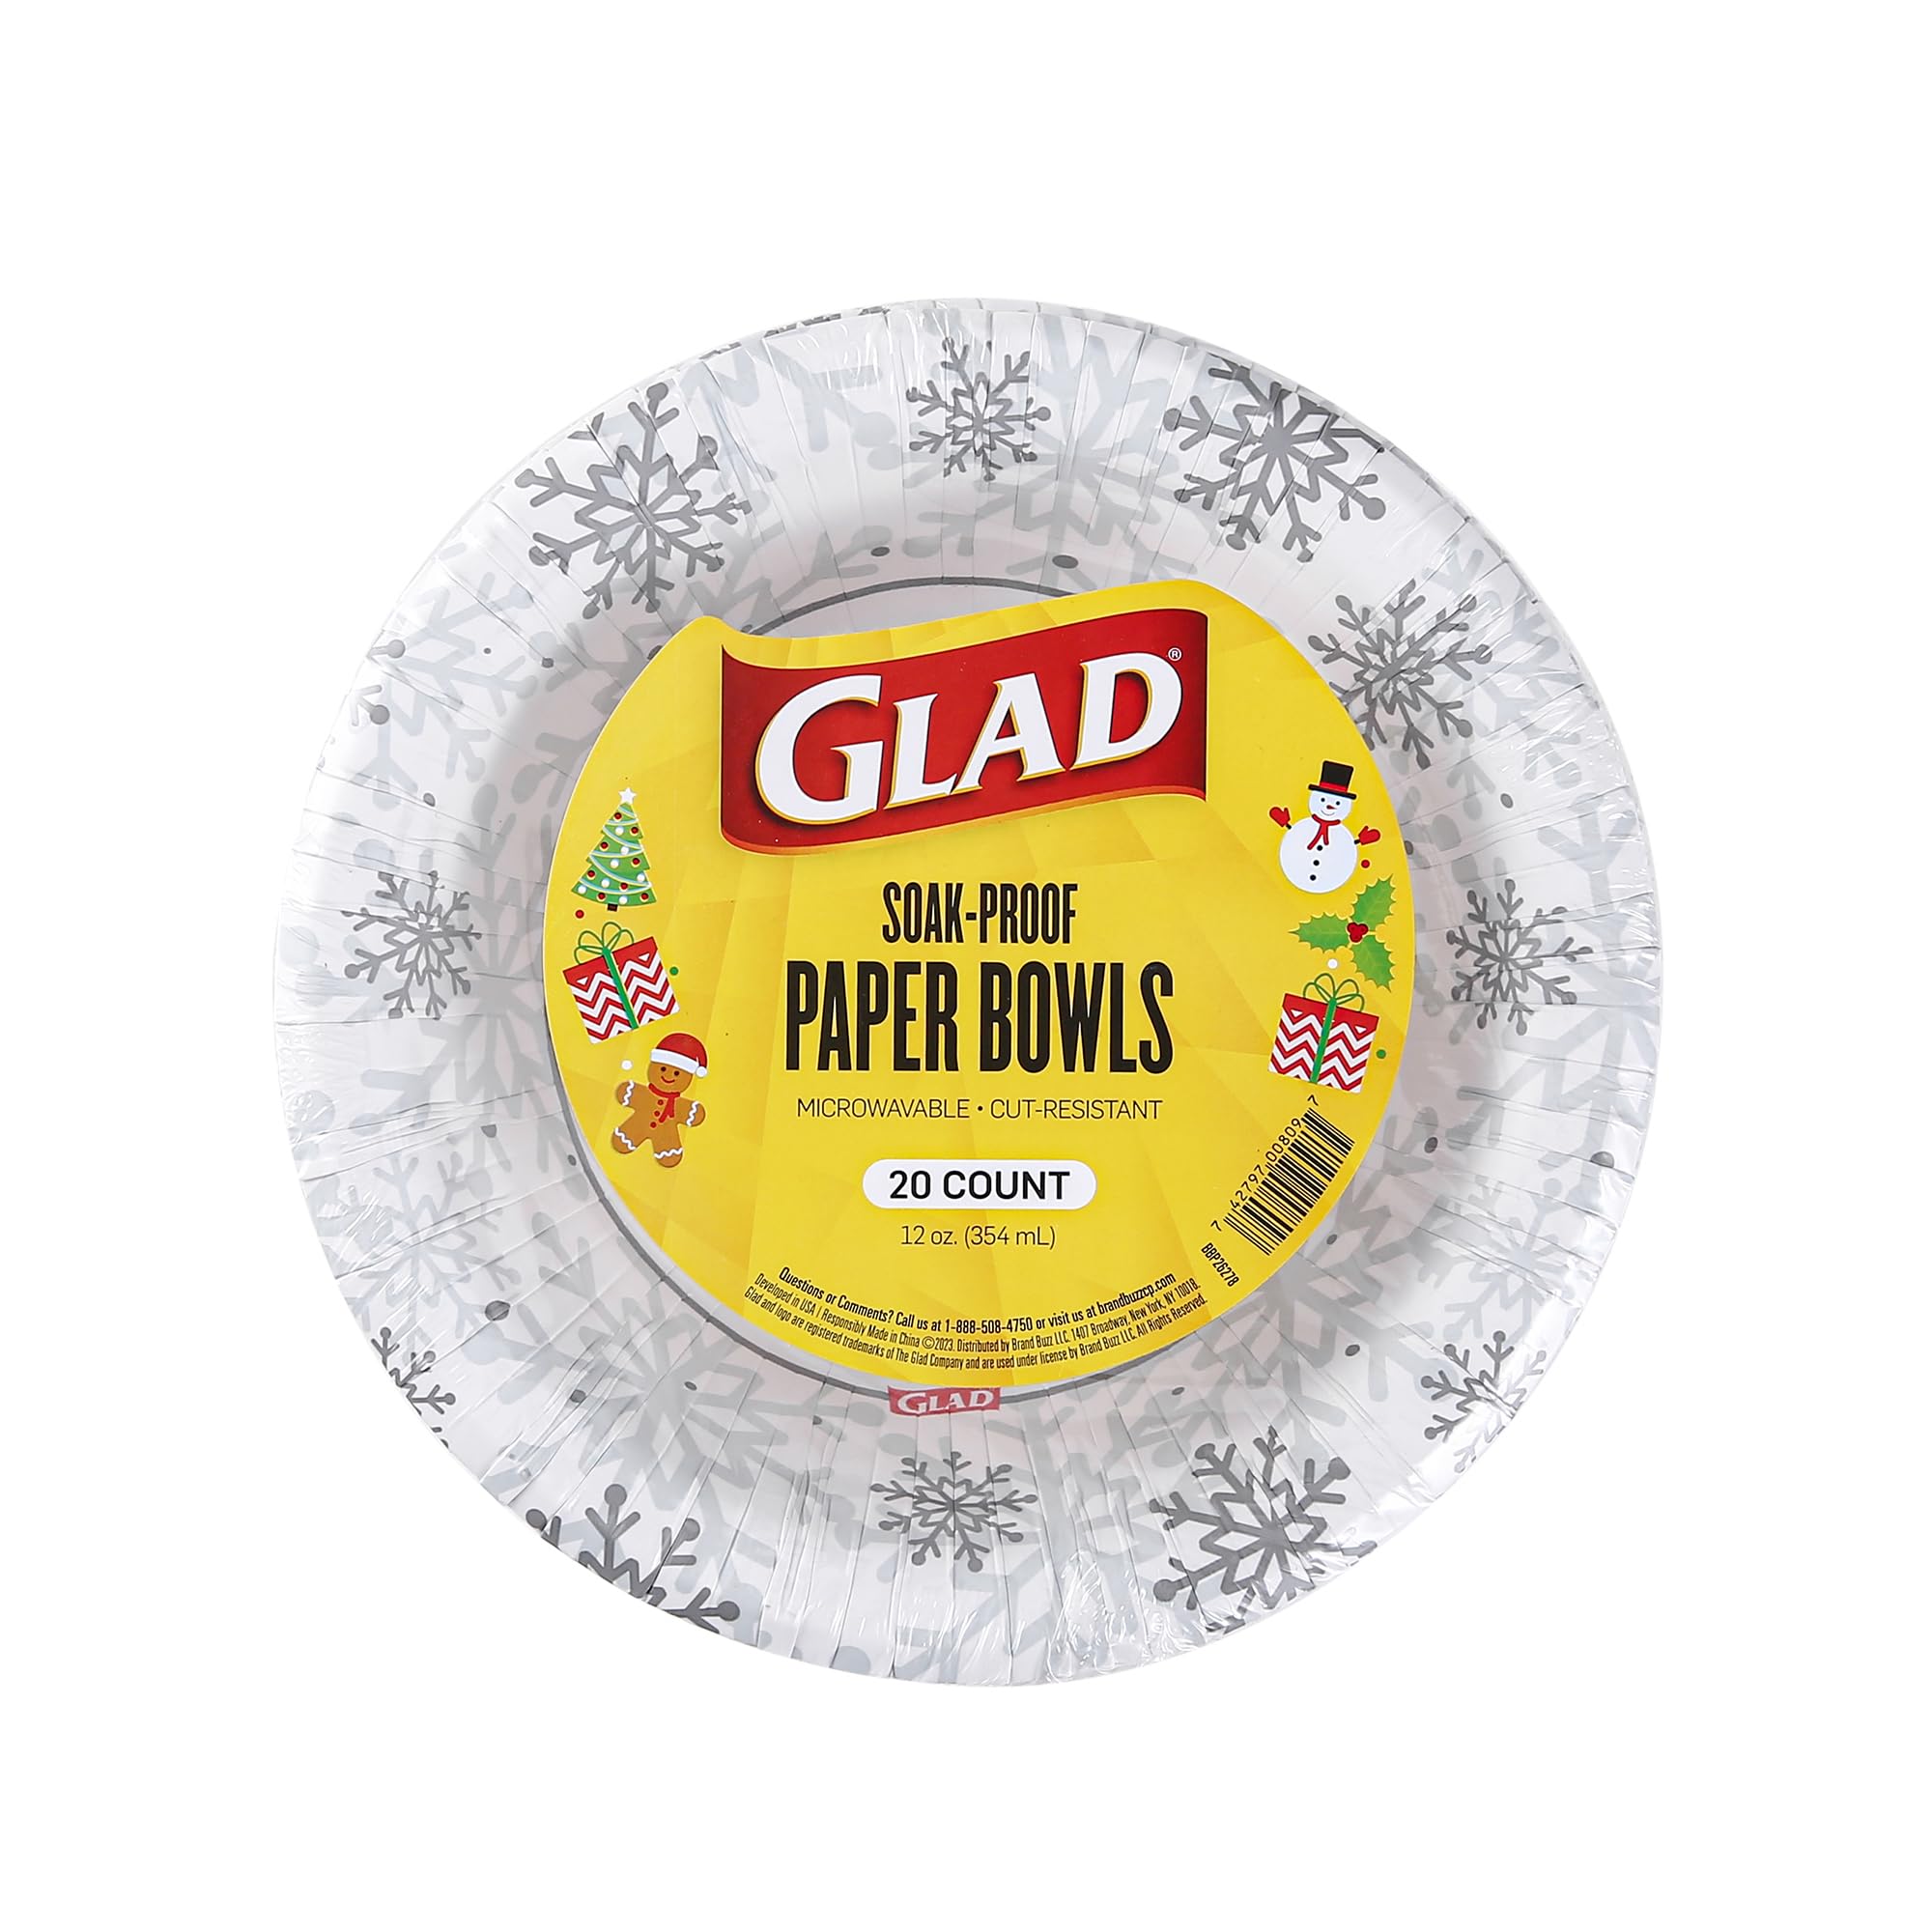 Glad Everyday Disposable Paper Bowls with Holiday Gray Snowflake Design | Heavy Duty Paper Bowls, Microwavable Paper Bowls for Everyday Use | Red Snowflake Holiday Design | 12 Ounces, 20 Count